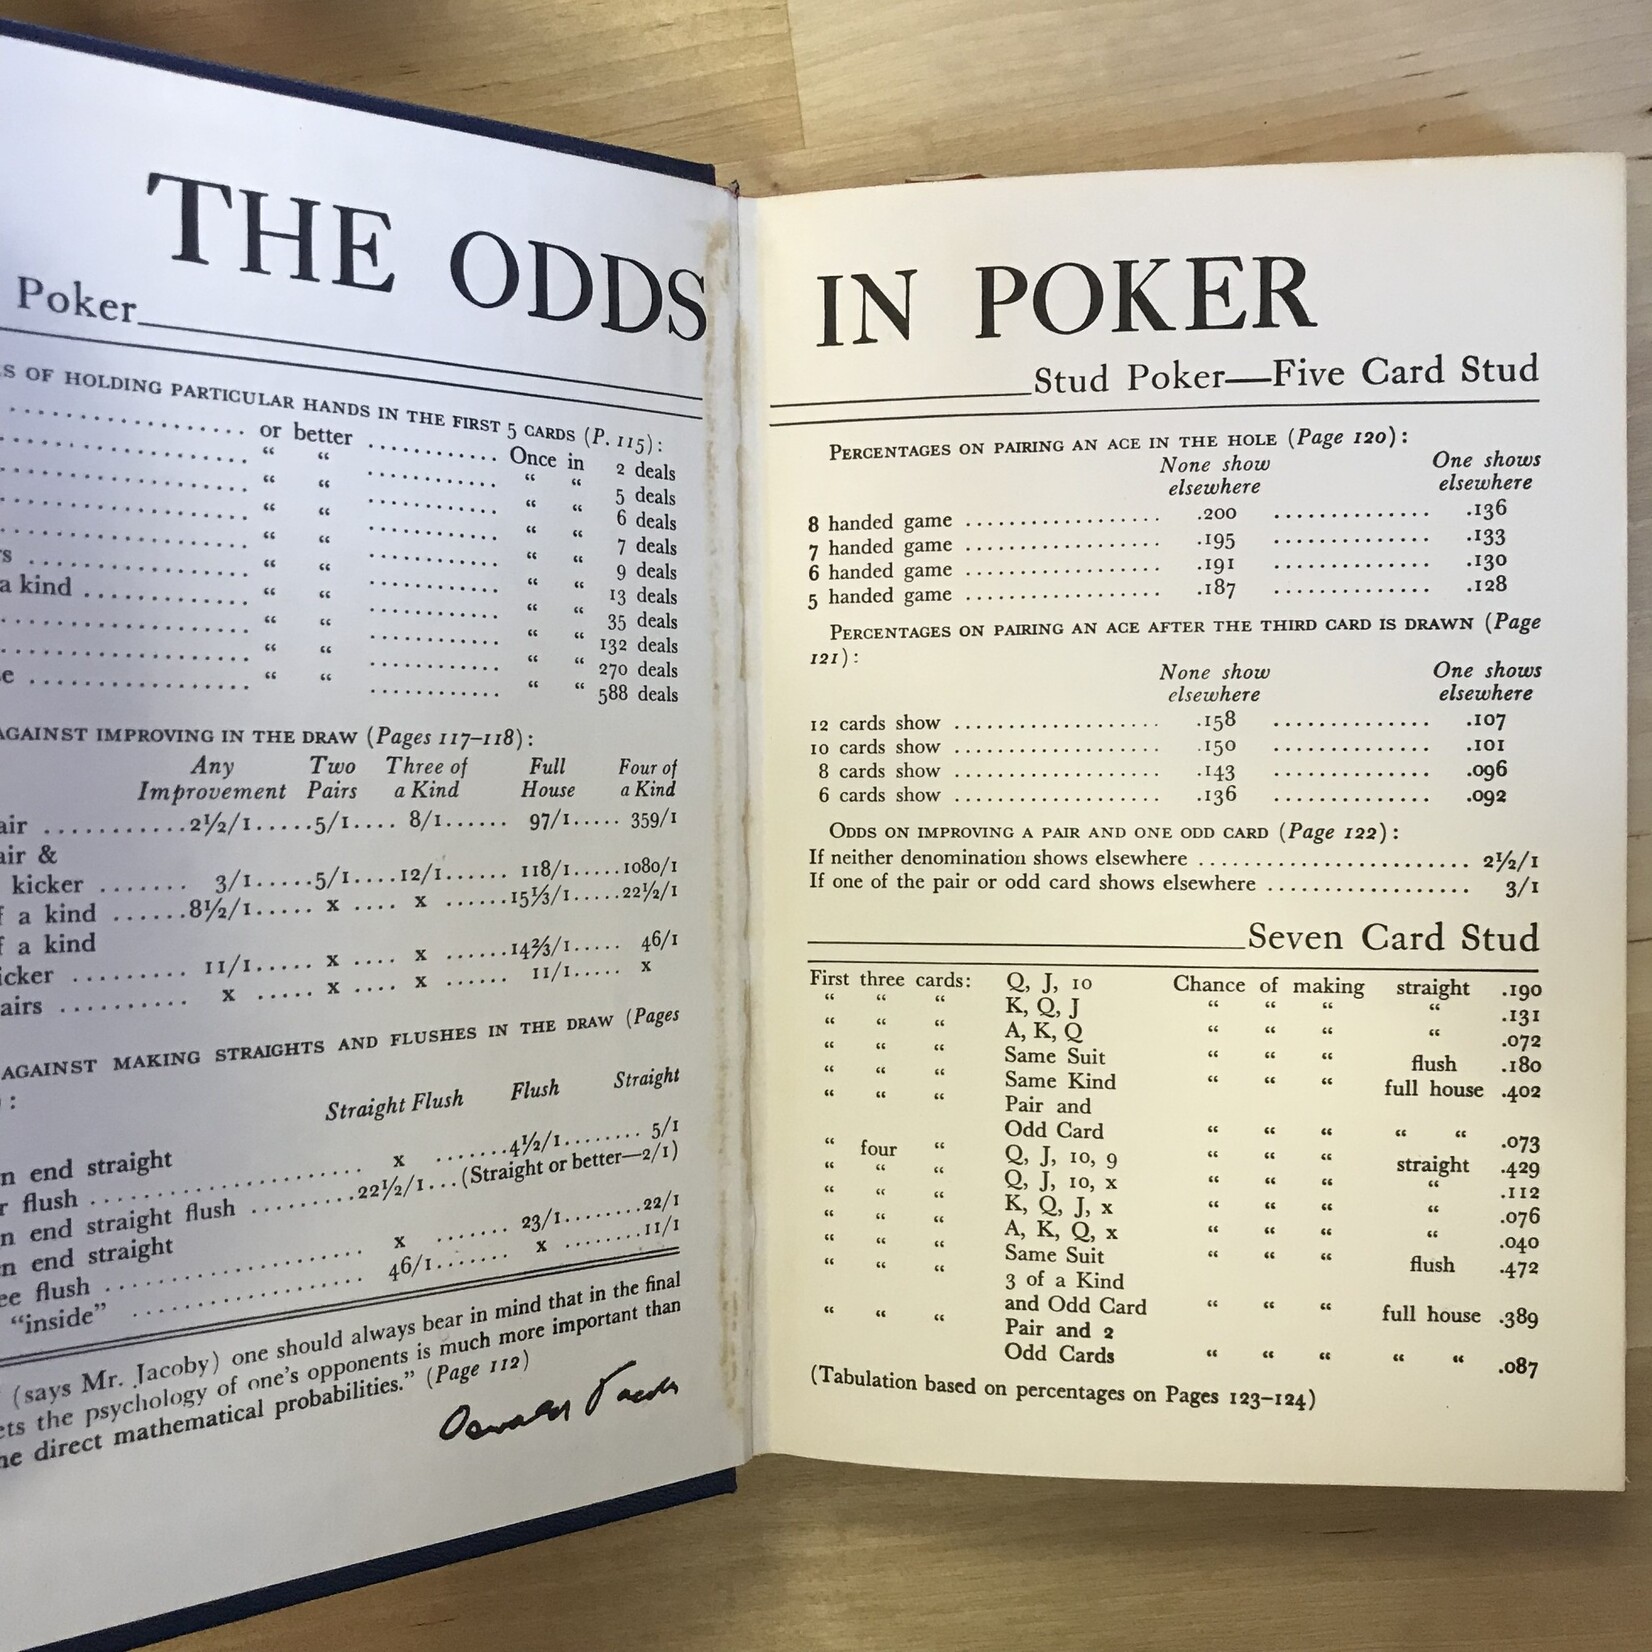 Oswald Jacoby - On Poker (New Revised Edition With Index) - Hardback (USED)